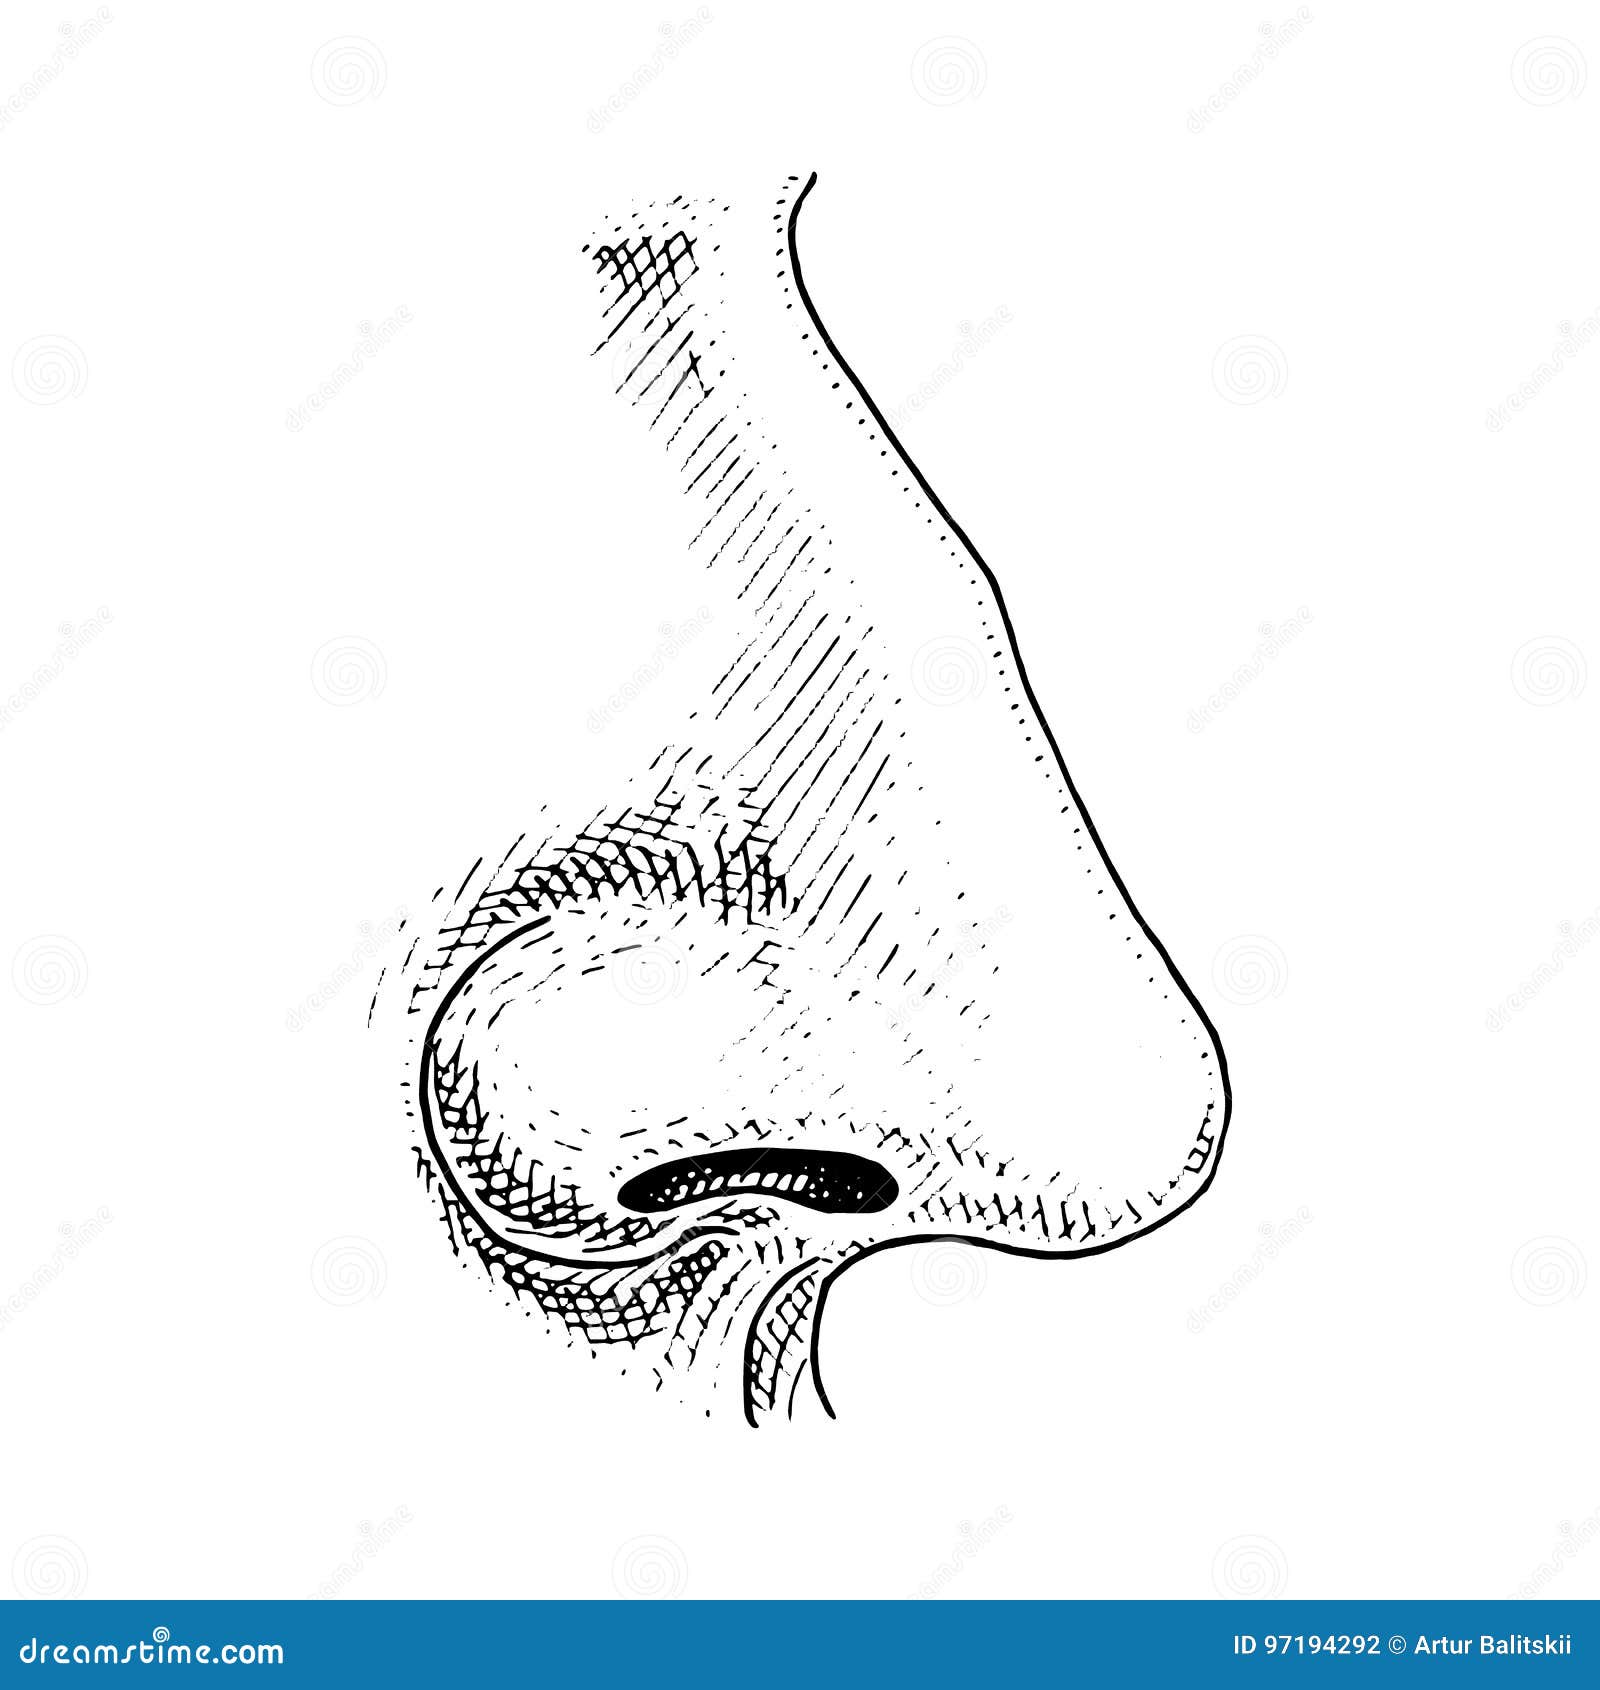 Proko  How to Draw a Nose  Anatomy and Structure